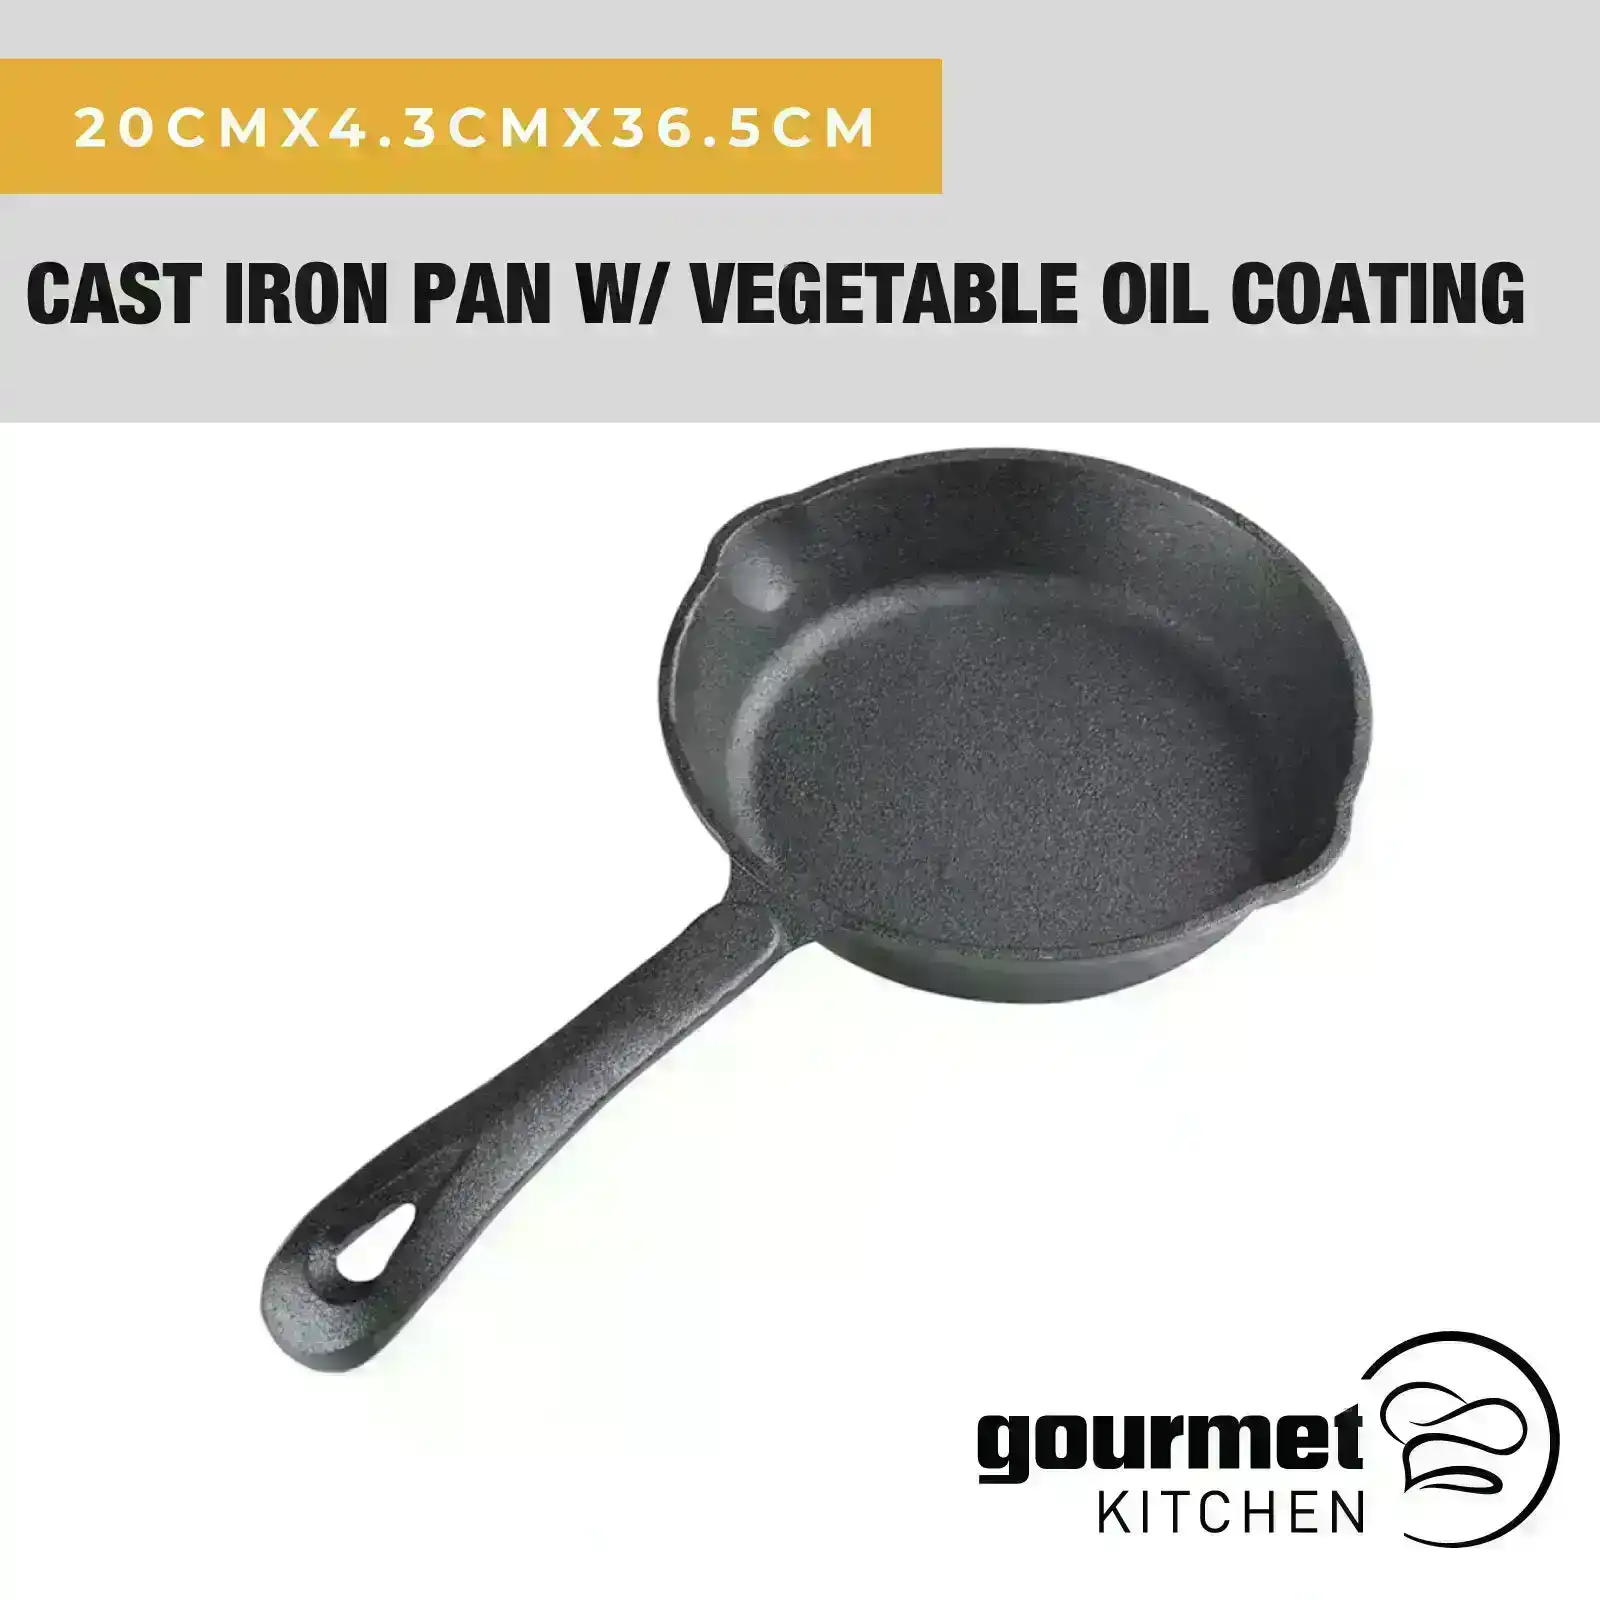 Gourmet Kitchen 17cm Cast Iron Pan with Vegetable Oil Coating  Cast Iron Skillet